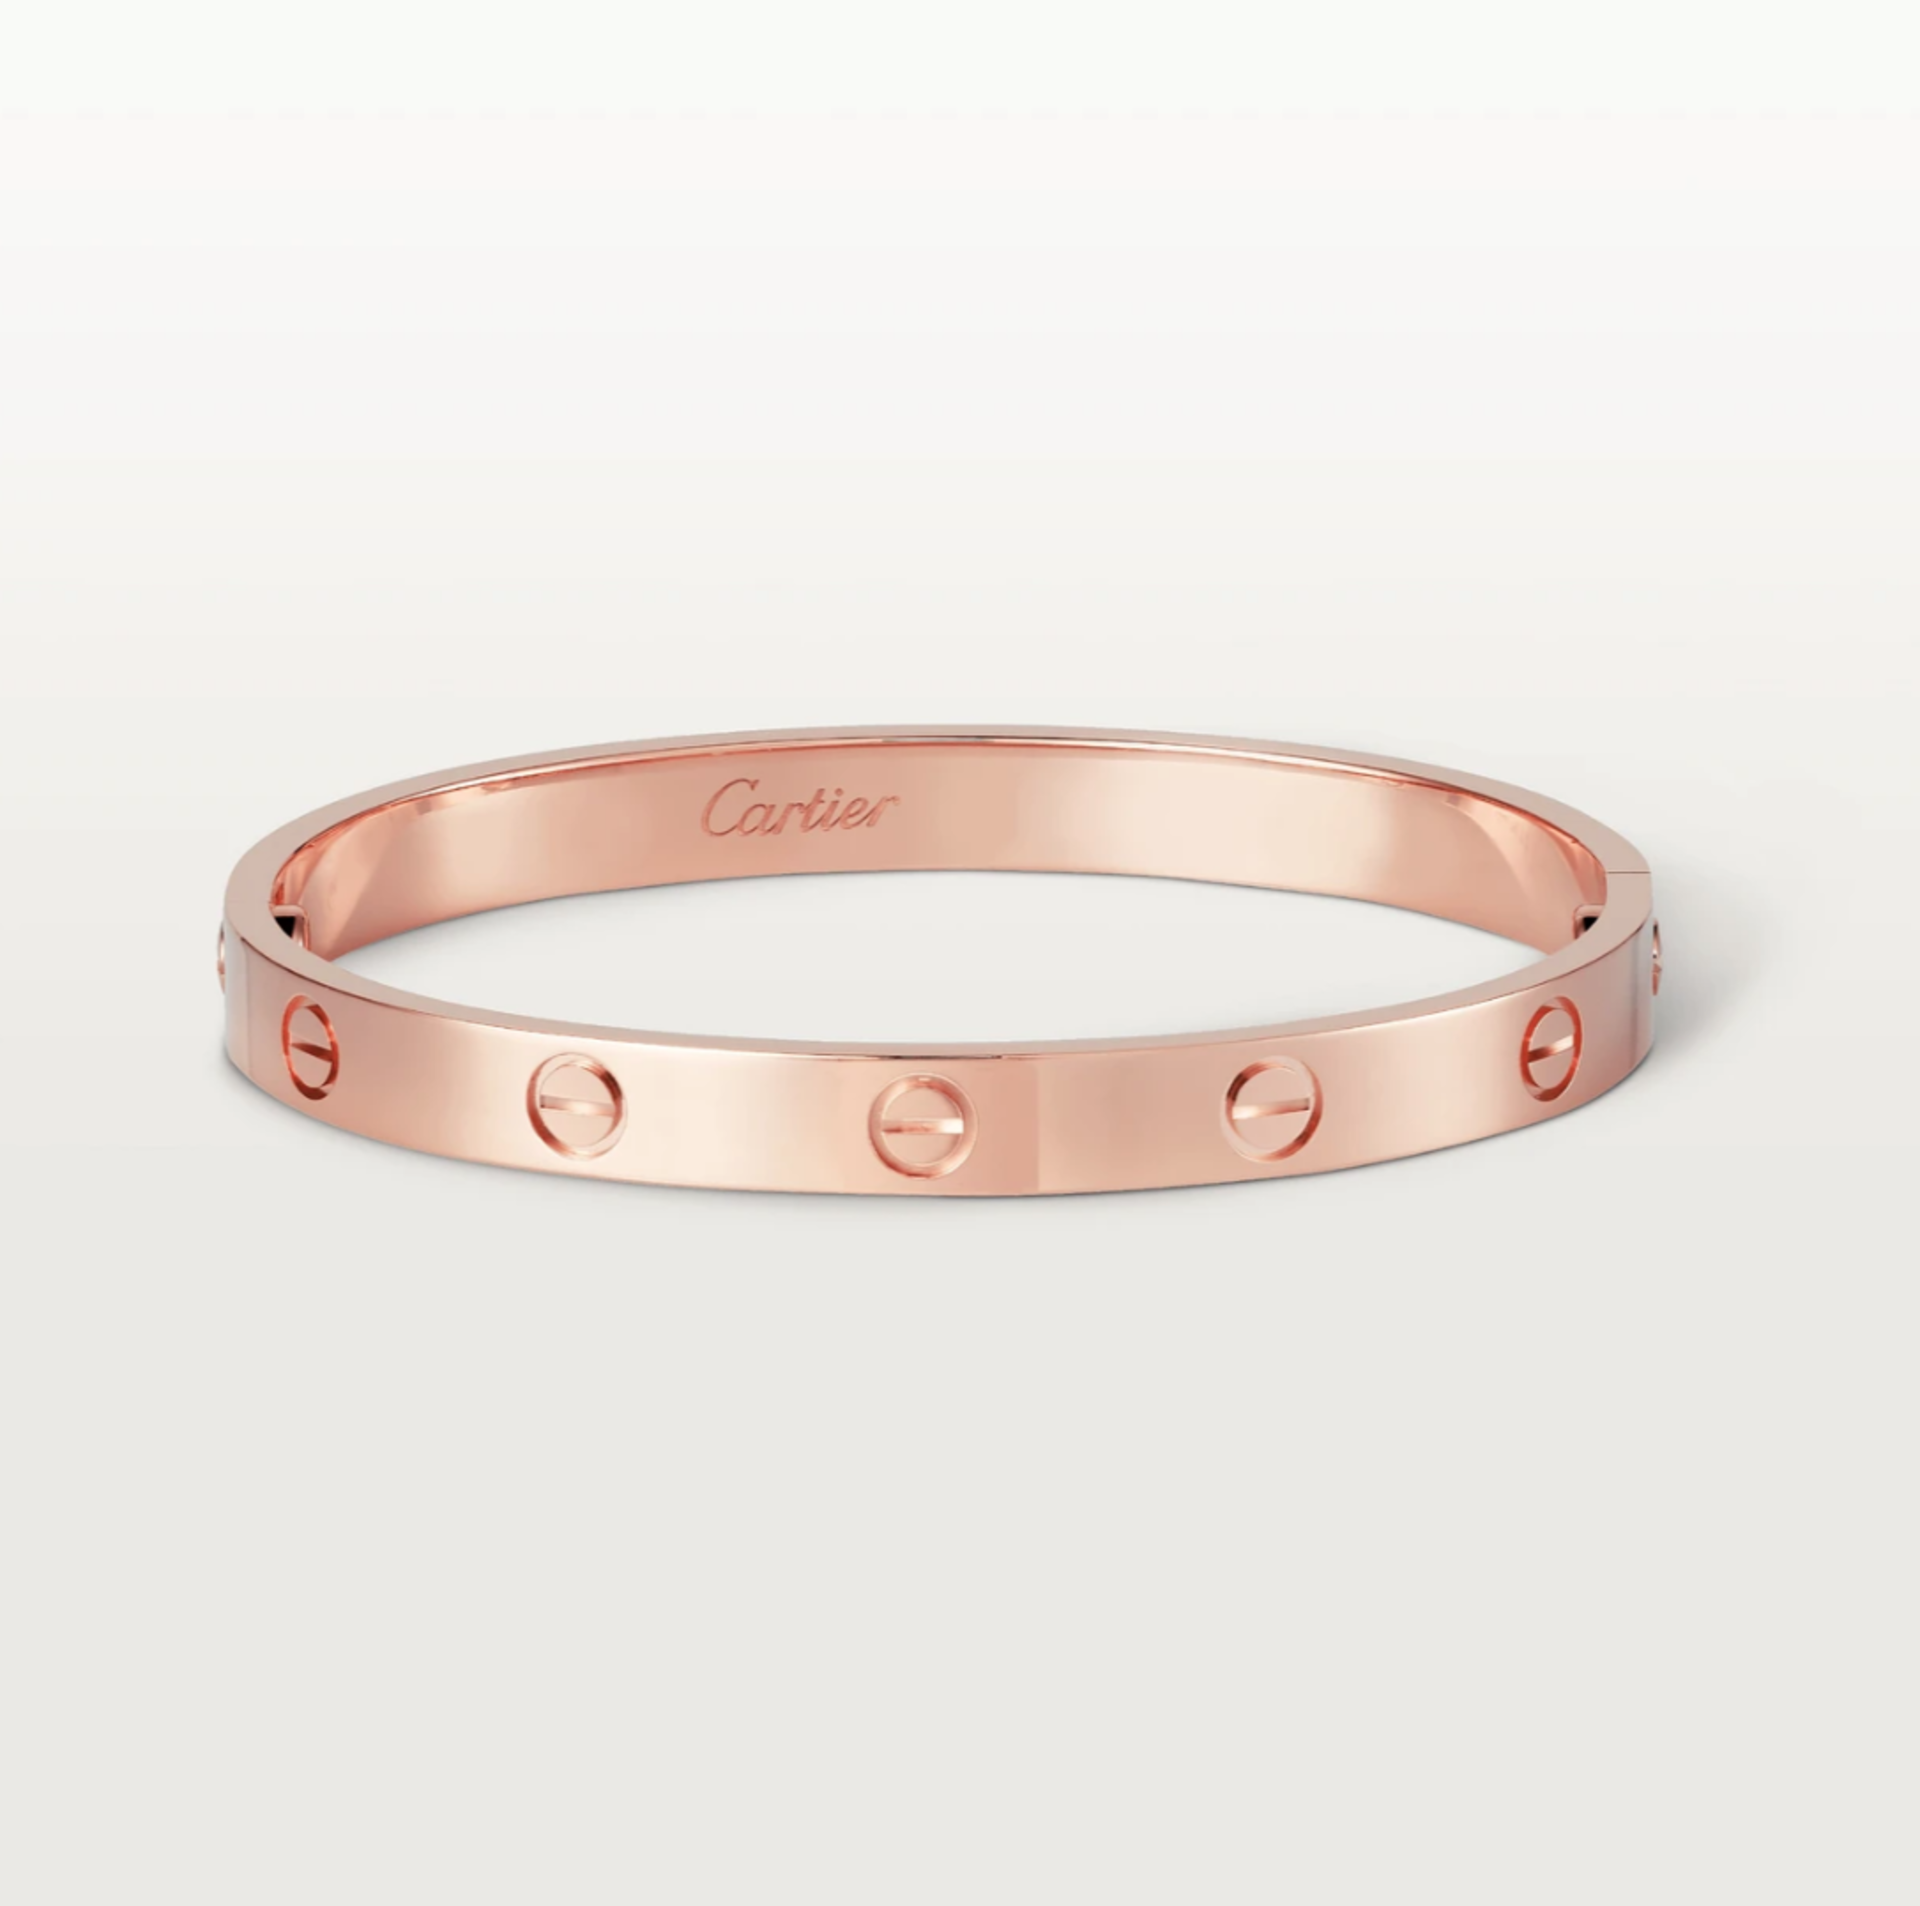 CARTIER "LOVE" 18K ROSE GOLD BANGLE FROM HARRODS, LONDON (SIZE 20CM - 6.1MM) - Image 2 of 8